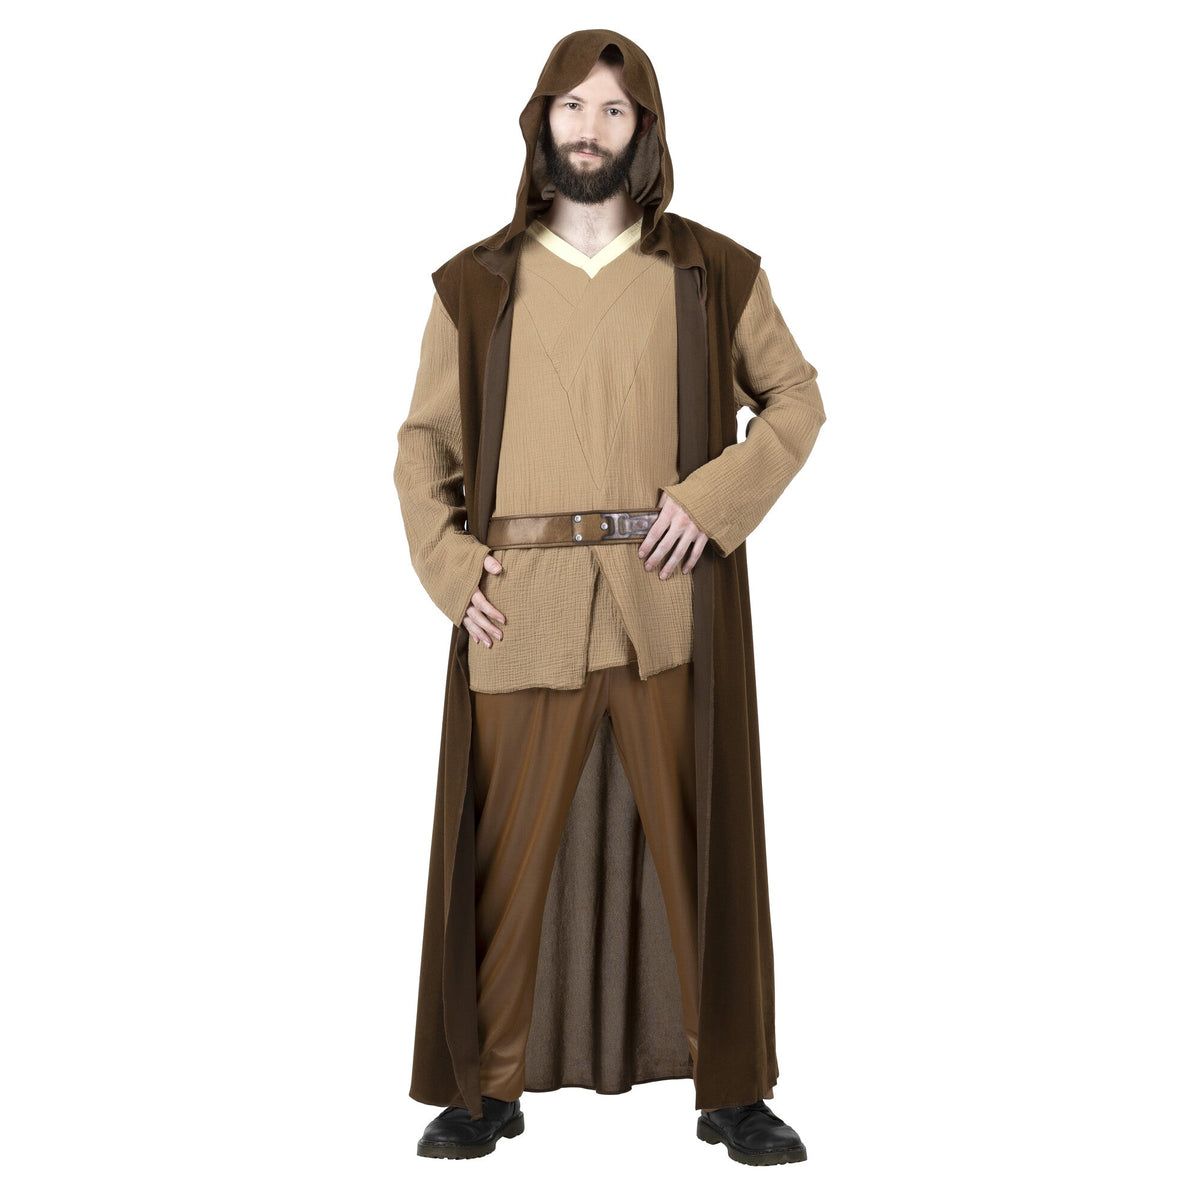 KROEGER Costumes Star Wars Obi-Wan Qualux Costume for Plus Size Adults, Brown Hooded Robe